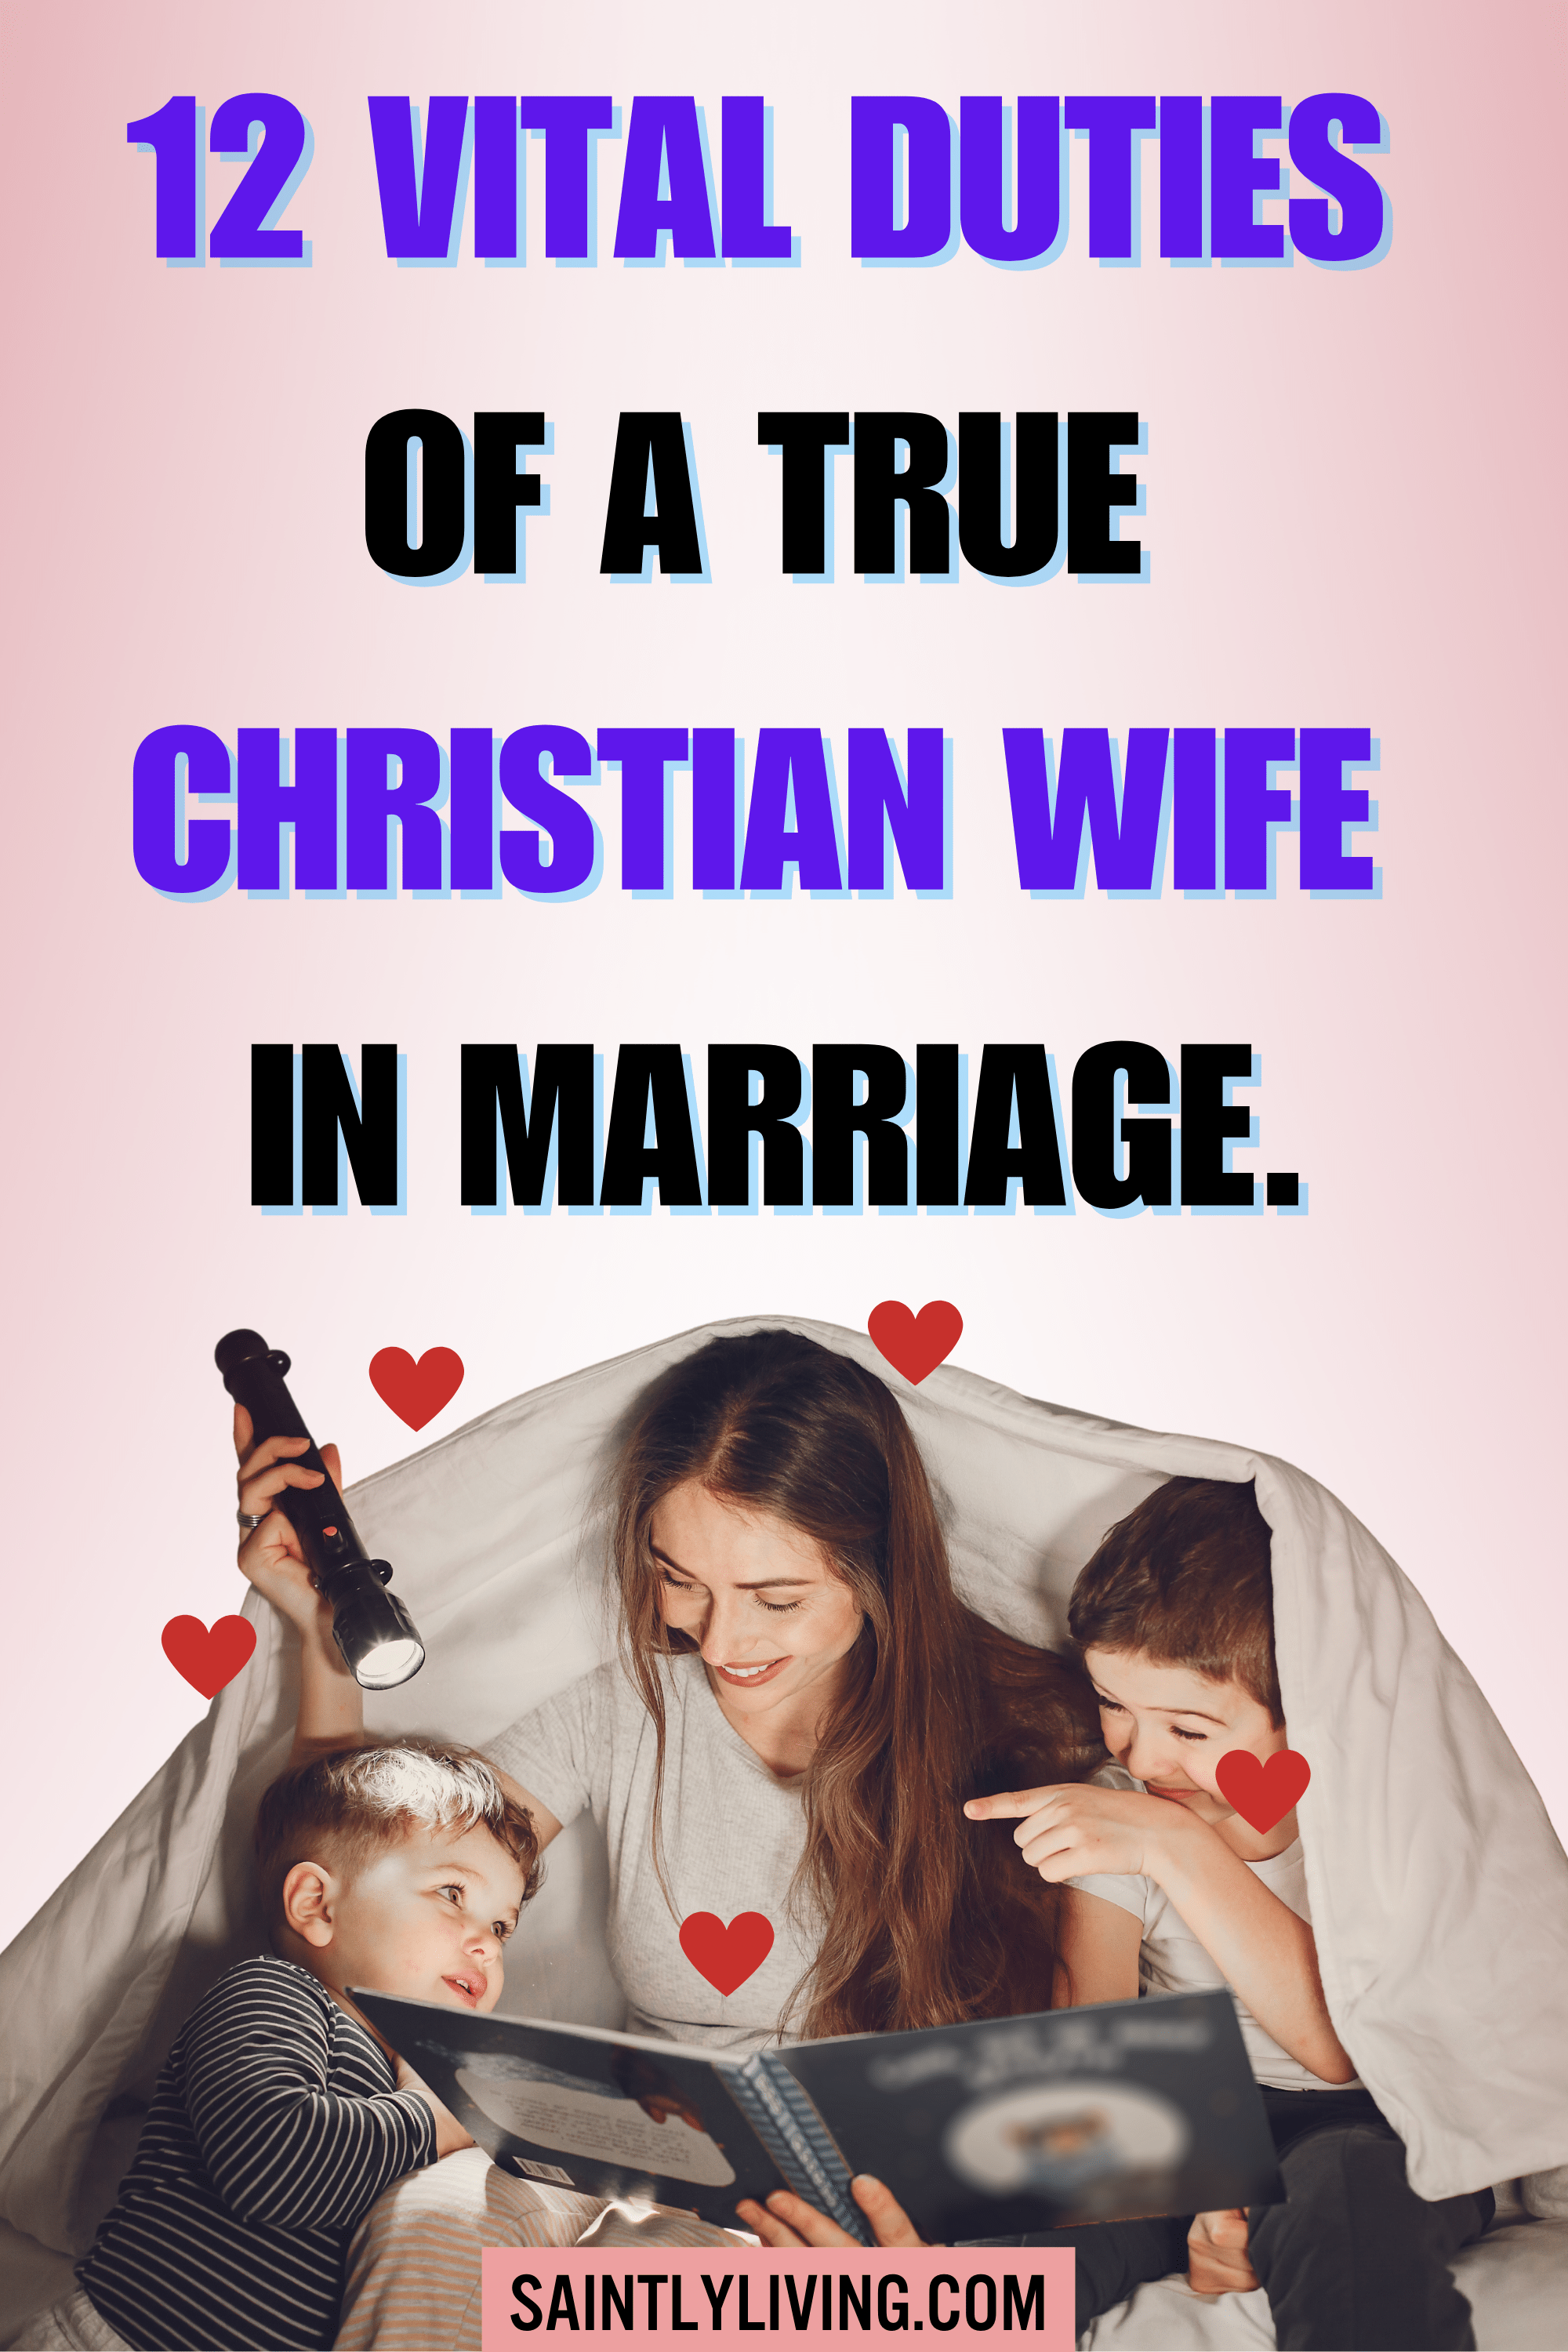 Duties of a Christian wife in a Christian marriage